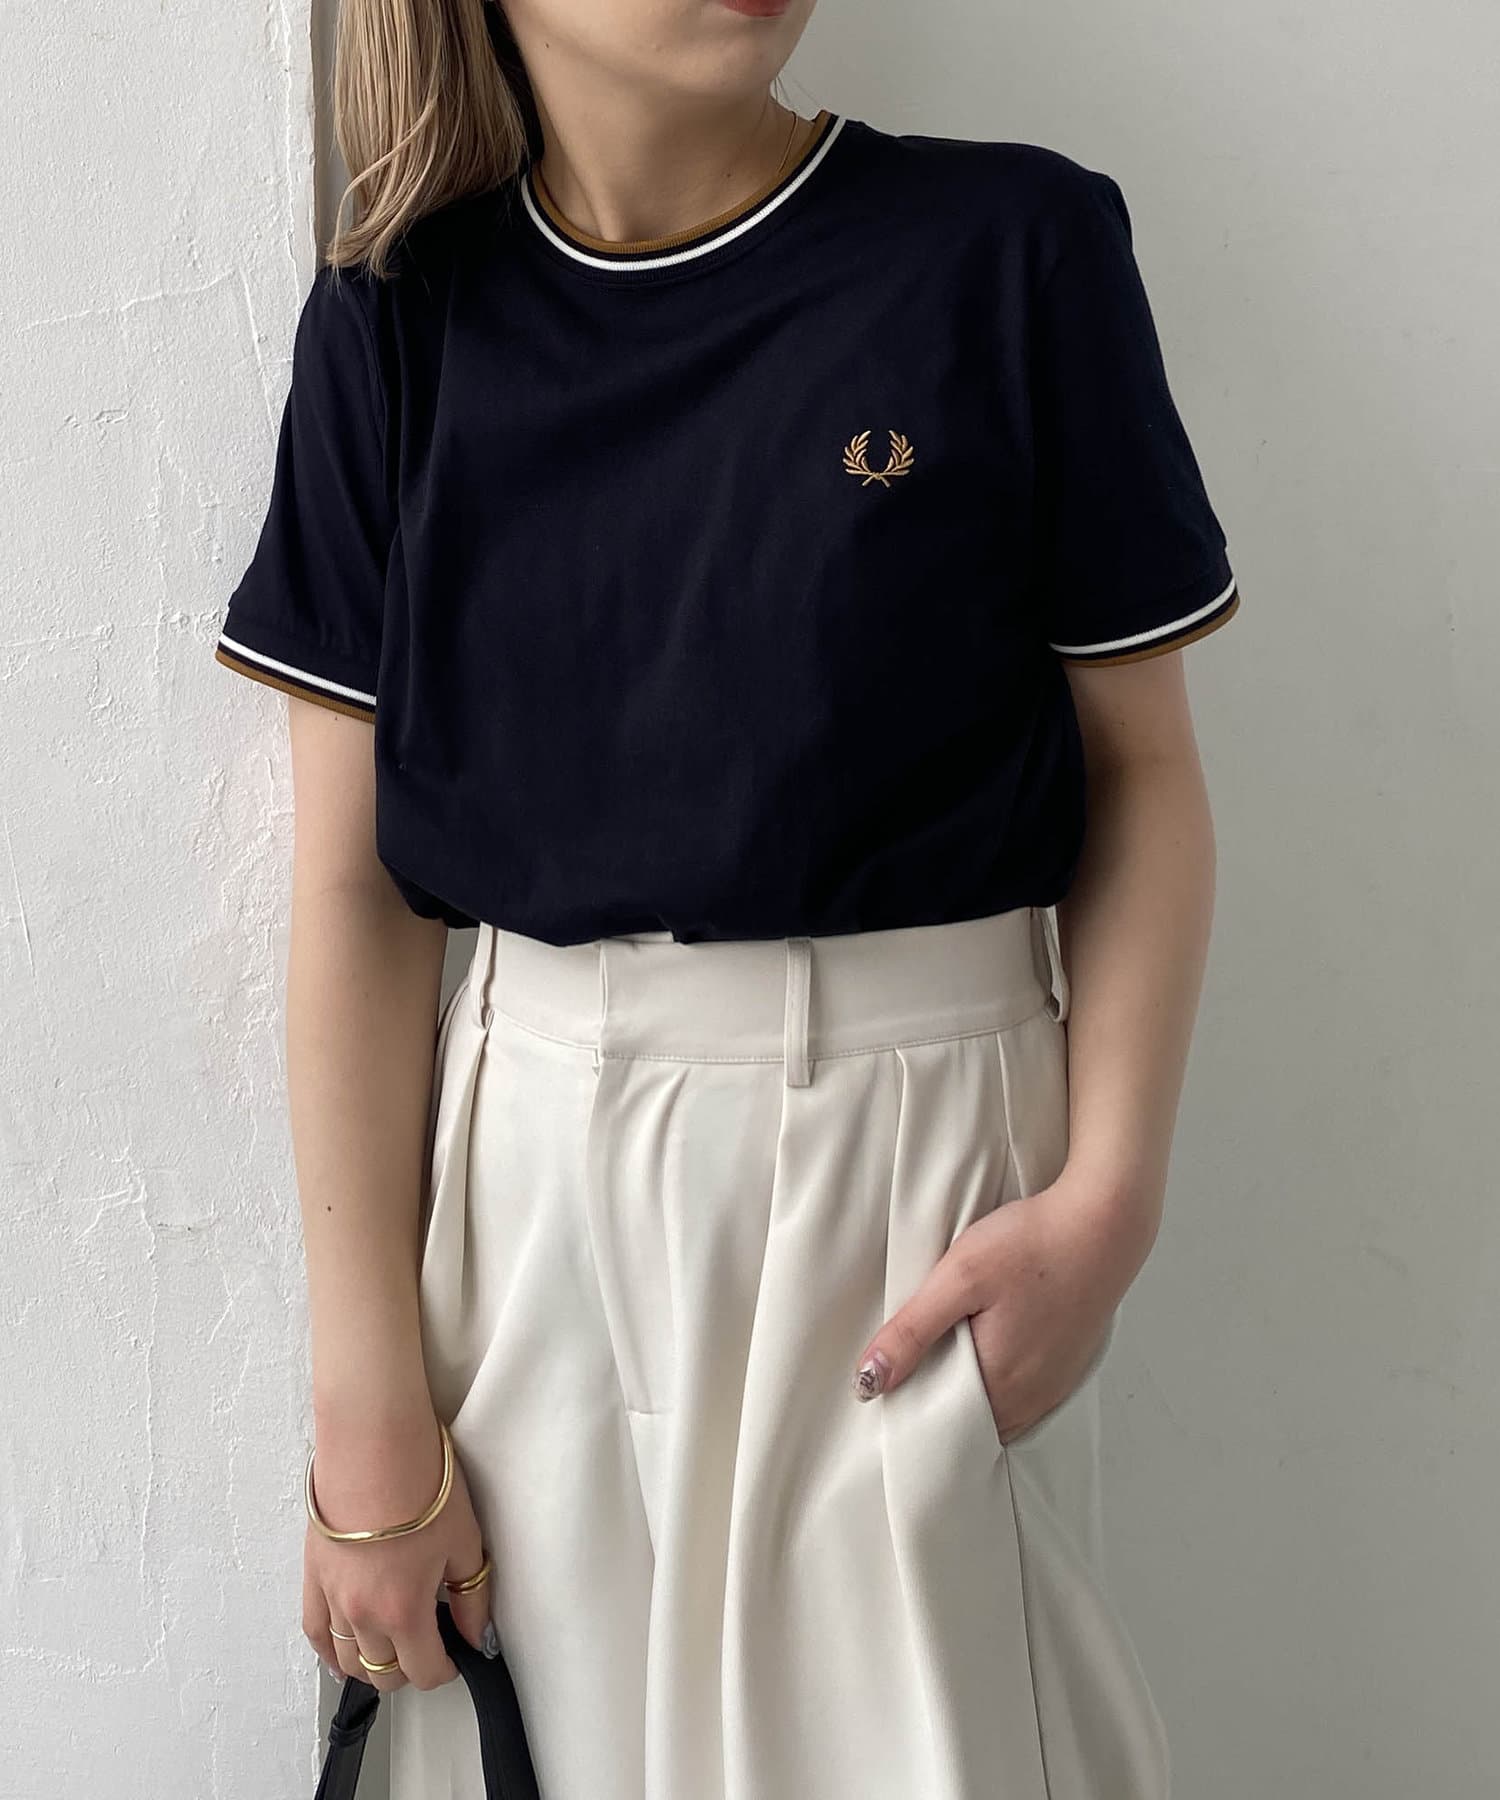 CAPRICIEUX LE'MAGE(カプリシュレマージュ) 【WEB・一部店舗限定】〈FRED PERRY〉ラインTシャツ